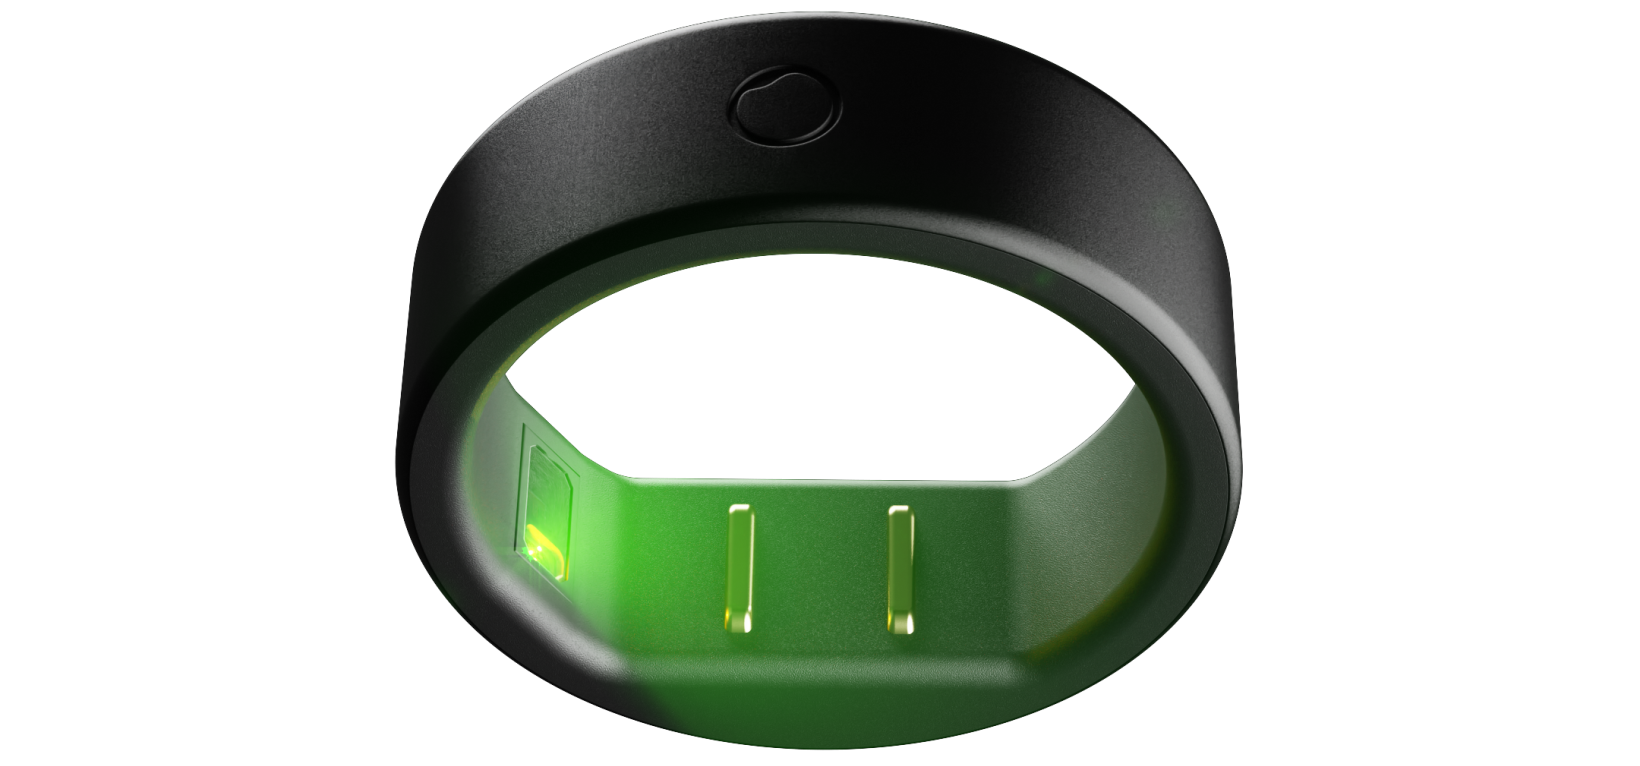 The Circular Slim smart ring with green light flashing from the inside